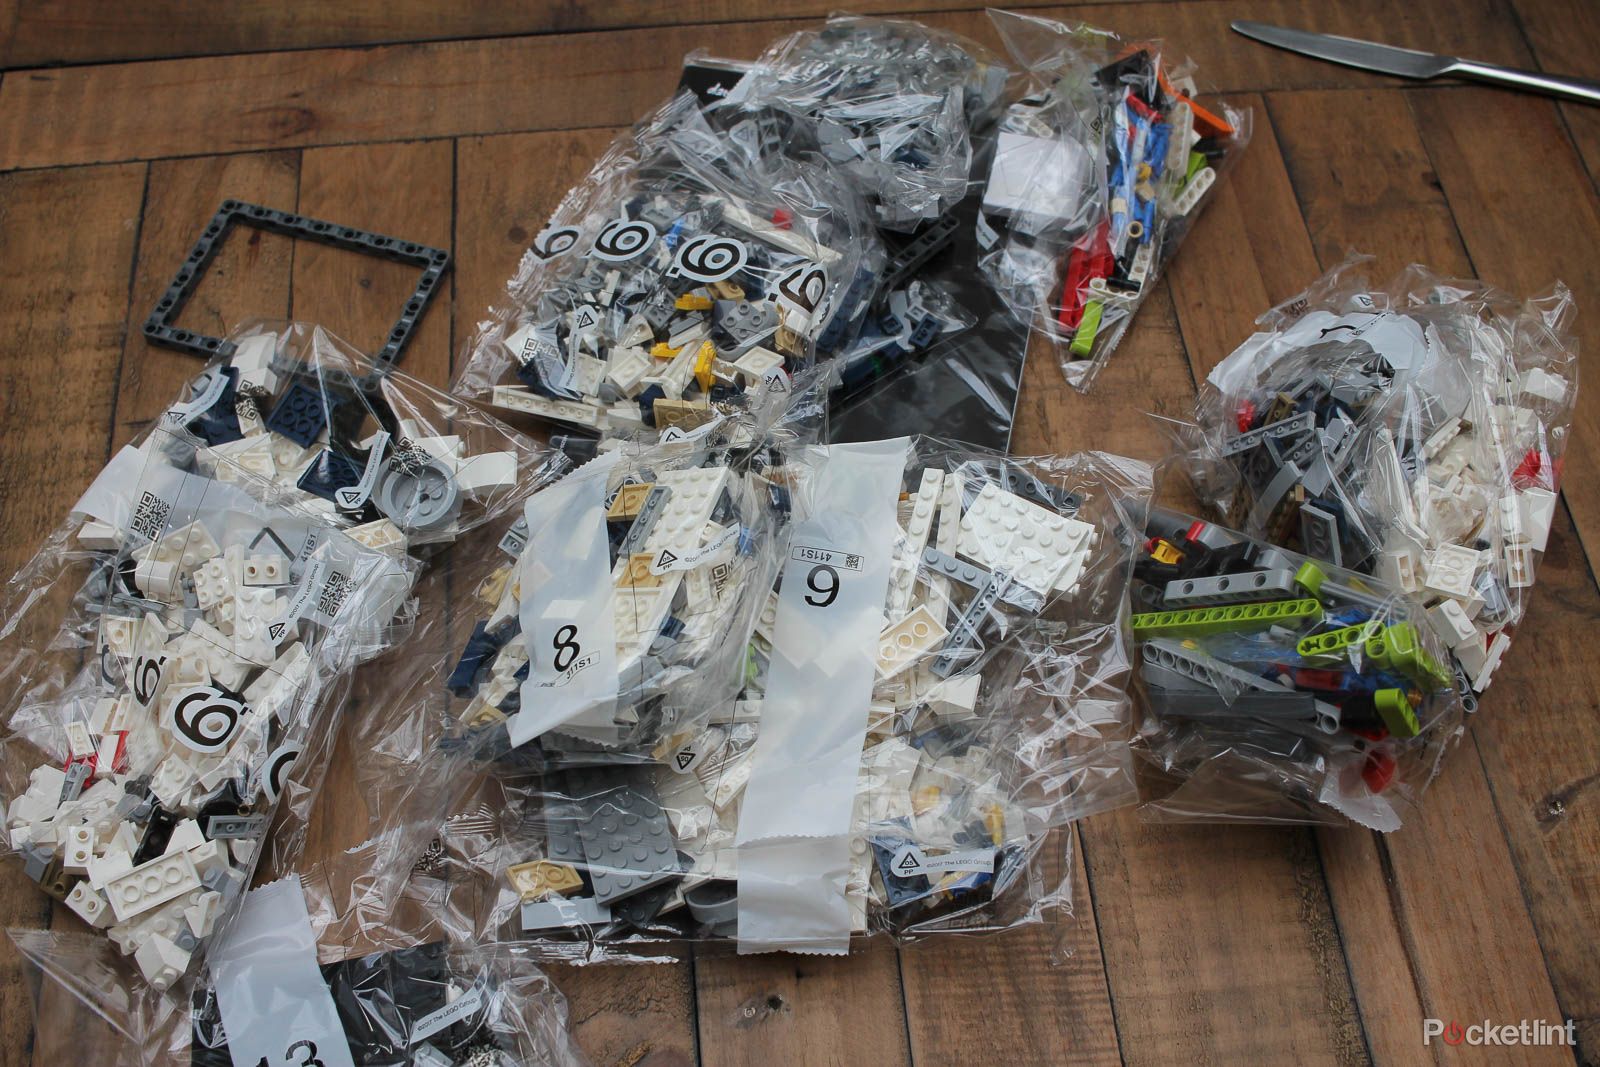 Lego R2-D2 hands on build pictures photo 1